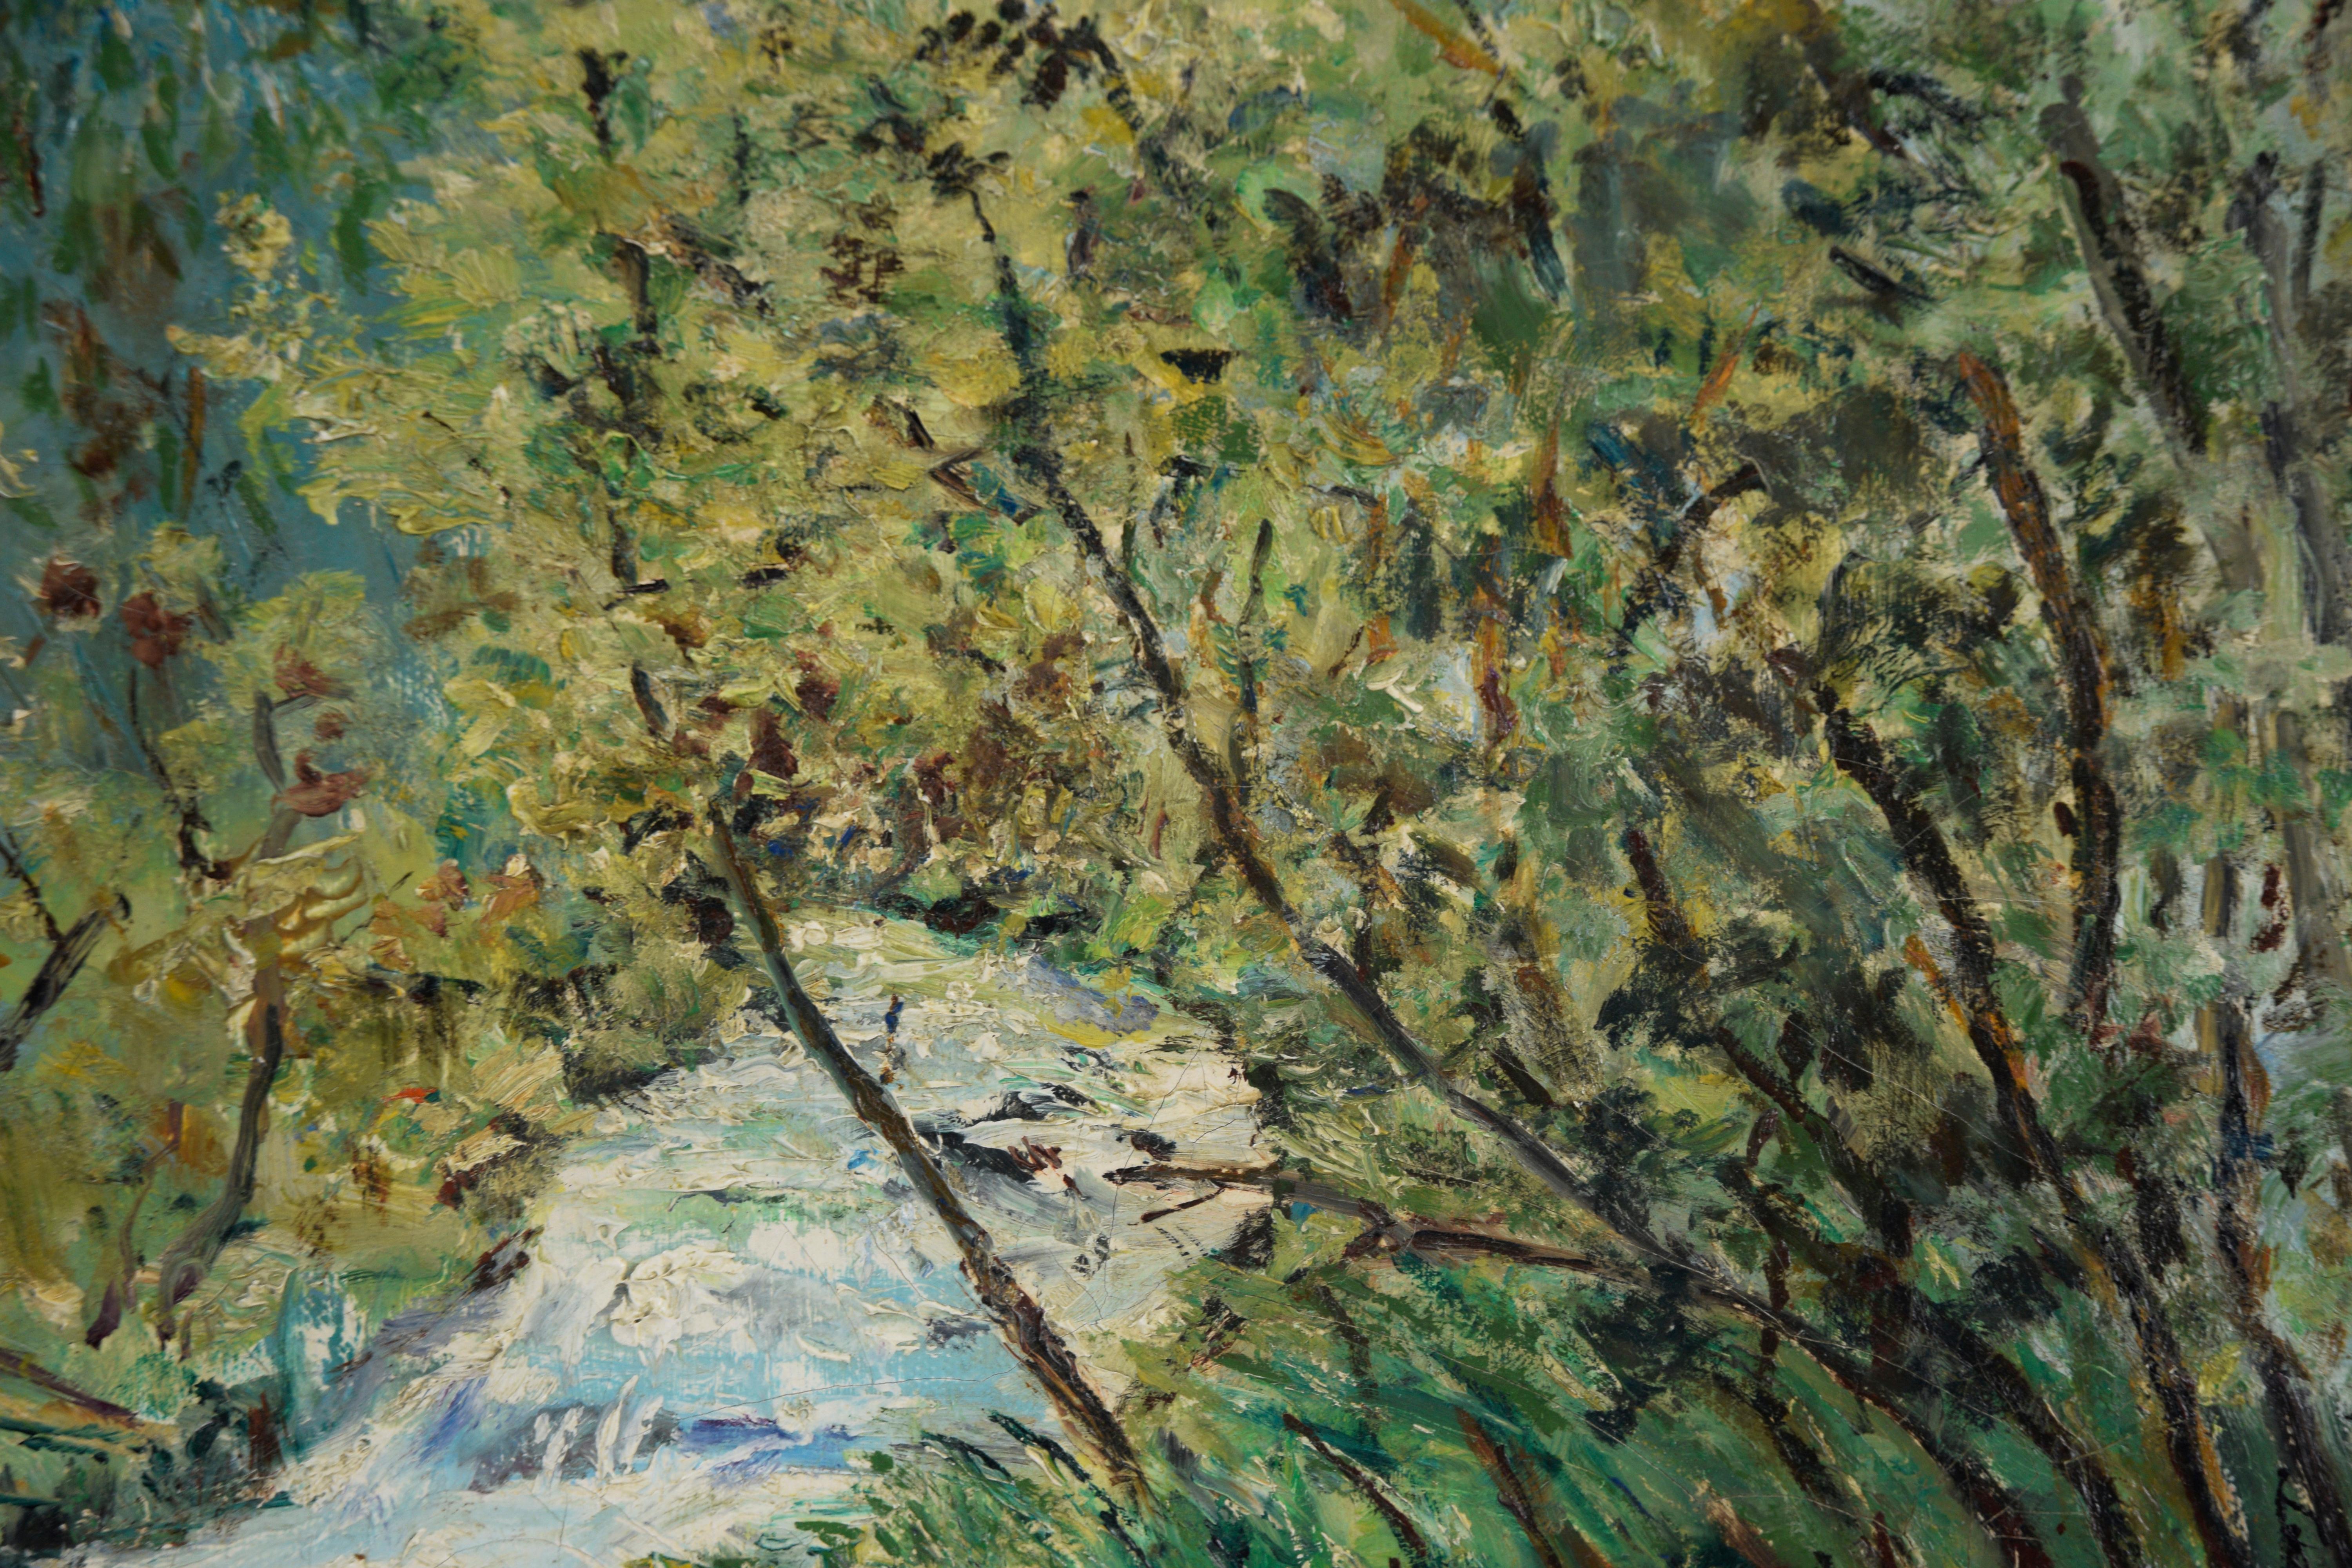 A Quiet River - Oil on Canvas

Oil painting depicting a river flowing through a grove of trees. Vibrant green trees surround the river, hues of deep greens make up the trees to the left of the river, while lighter colored trees to the right. The sky